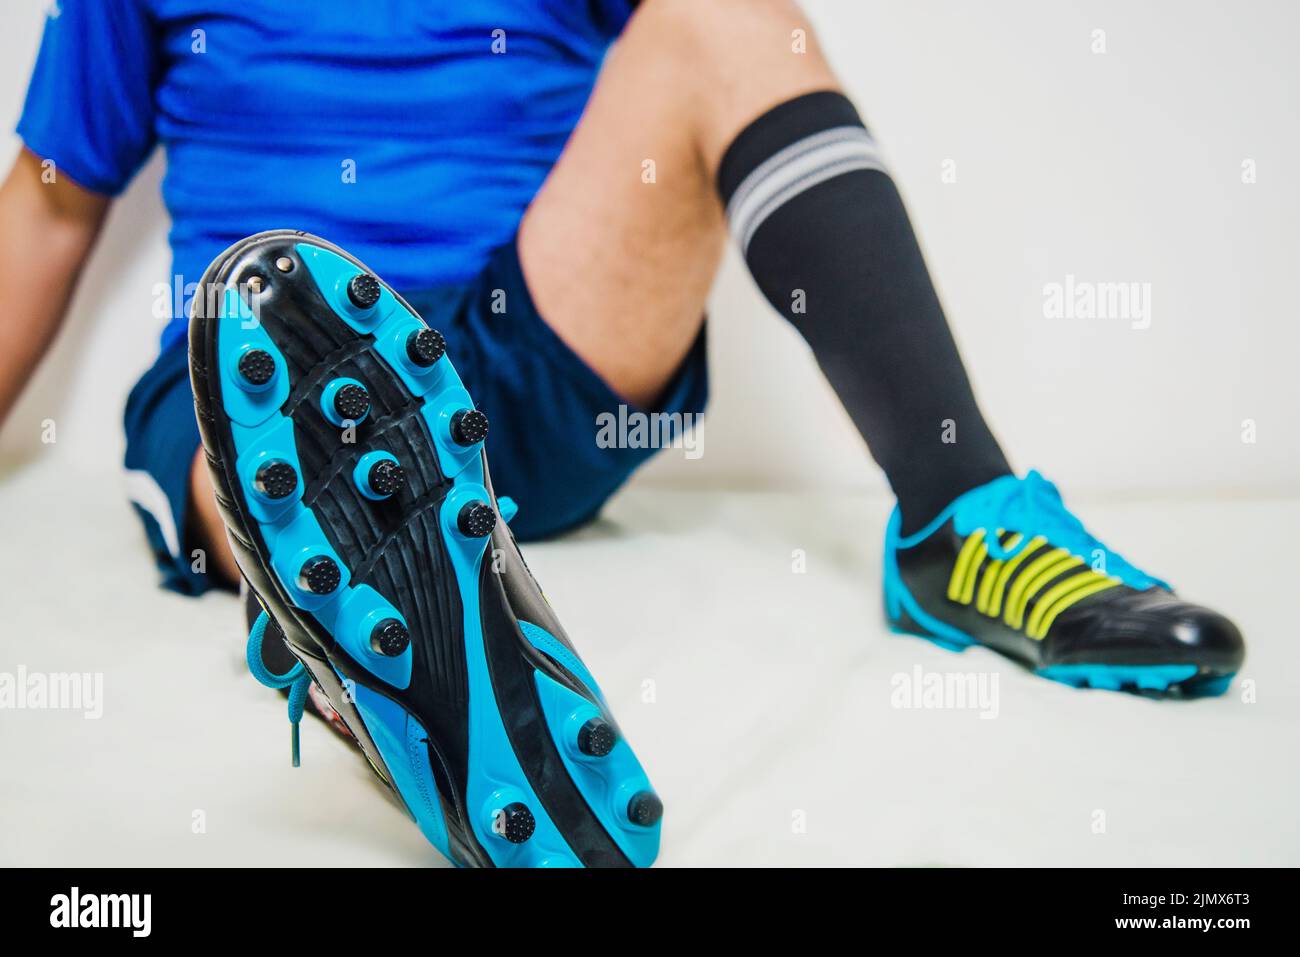 Football player relaxing shoe view Stock Photo